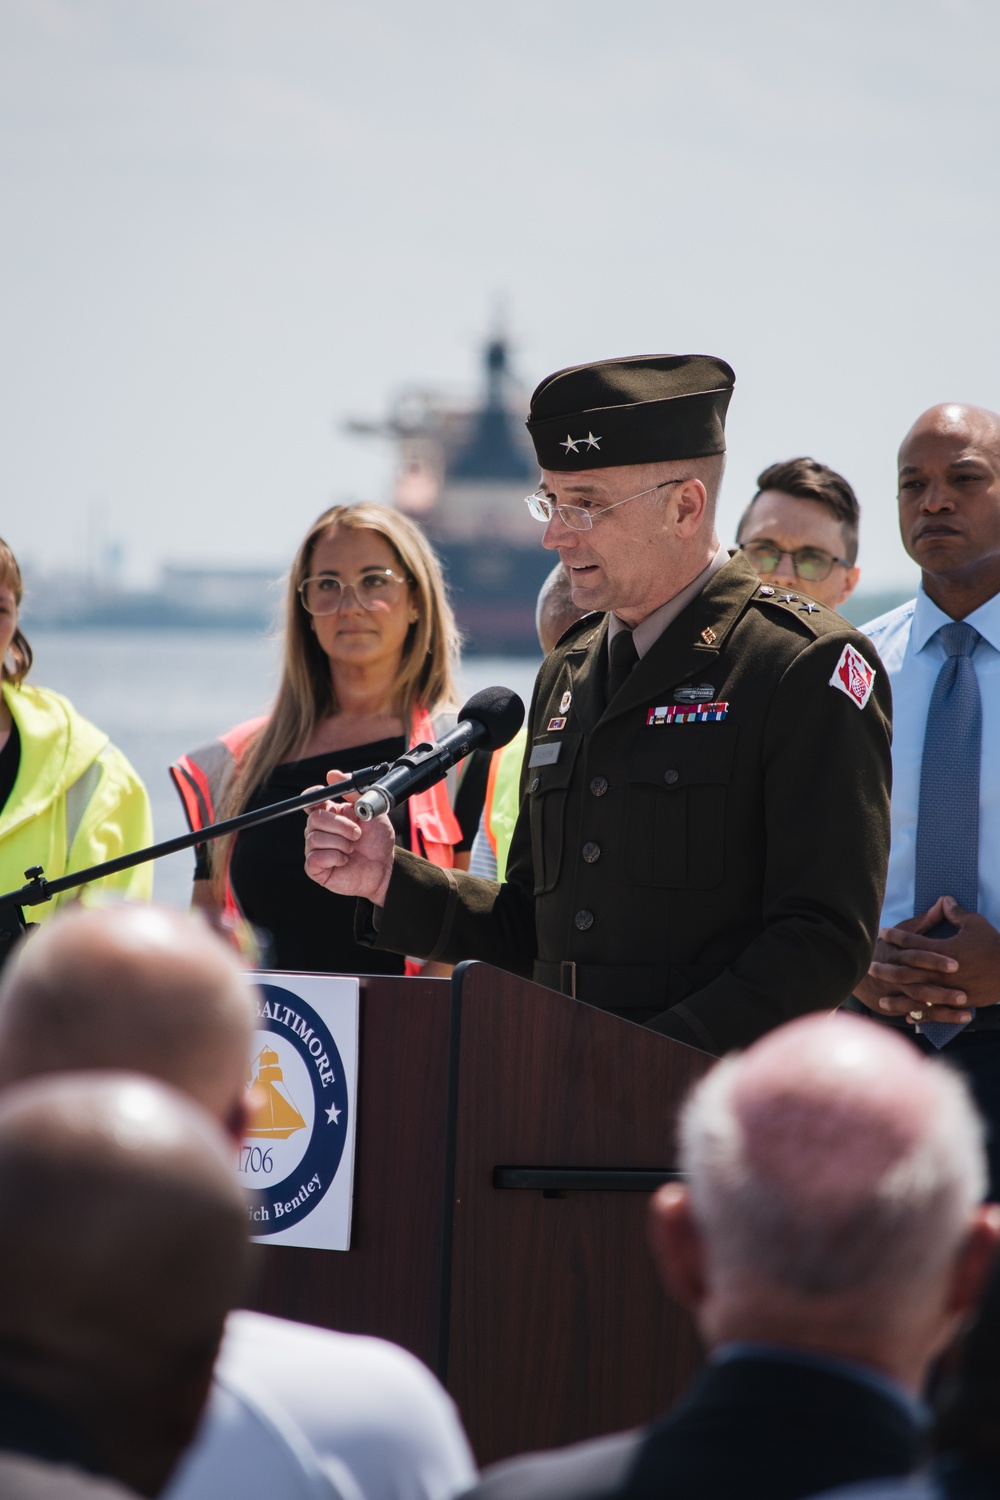 Key Bridge Unified Command participates in press event at Port of Baltimore to mark full federal channel reopening